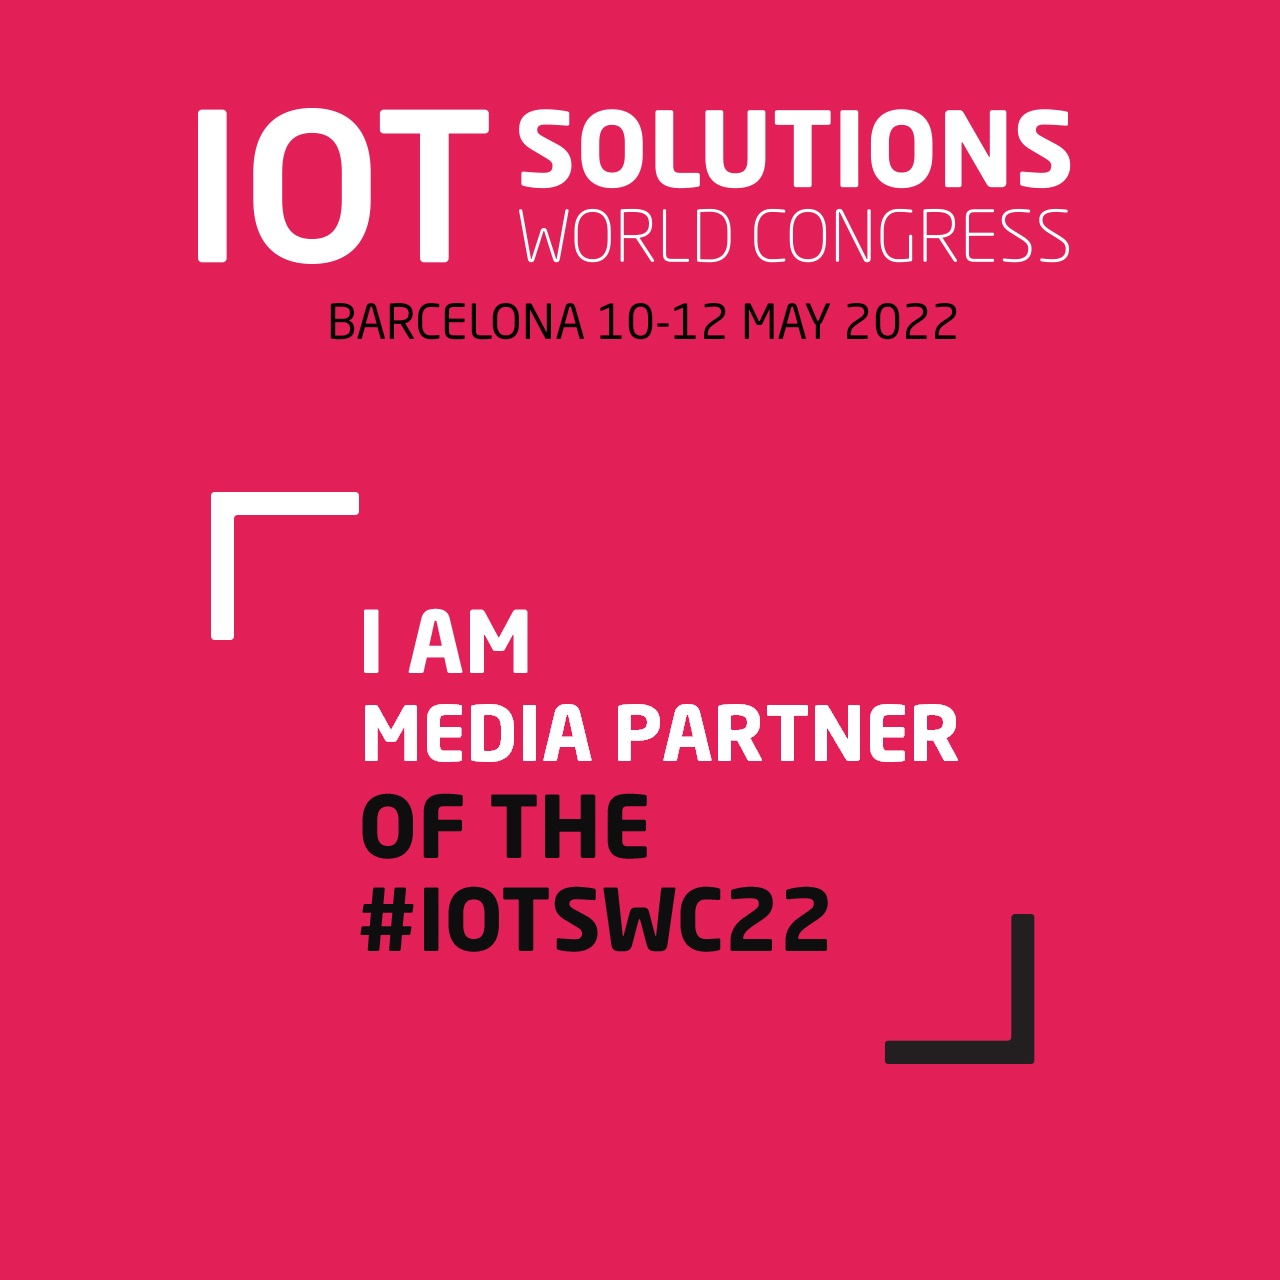 IoT Solutions World Congress: the International Meeting for the Leaders in Digital Transformation